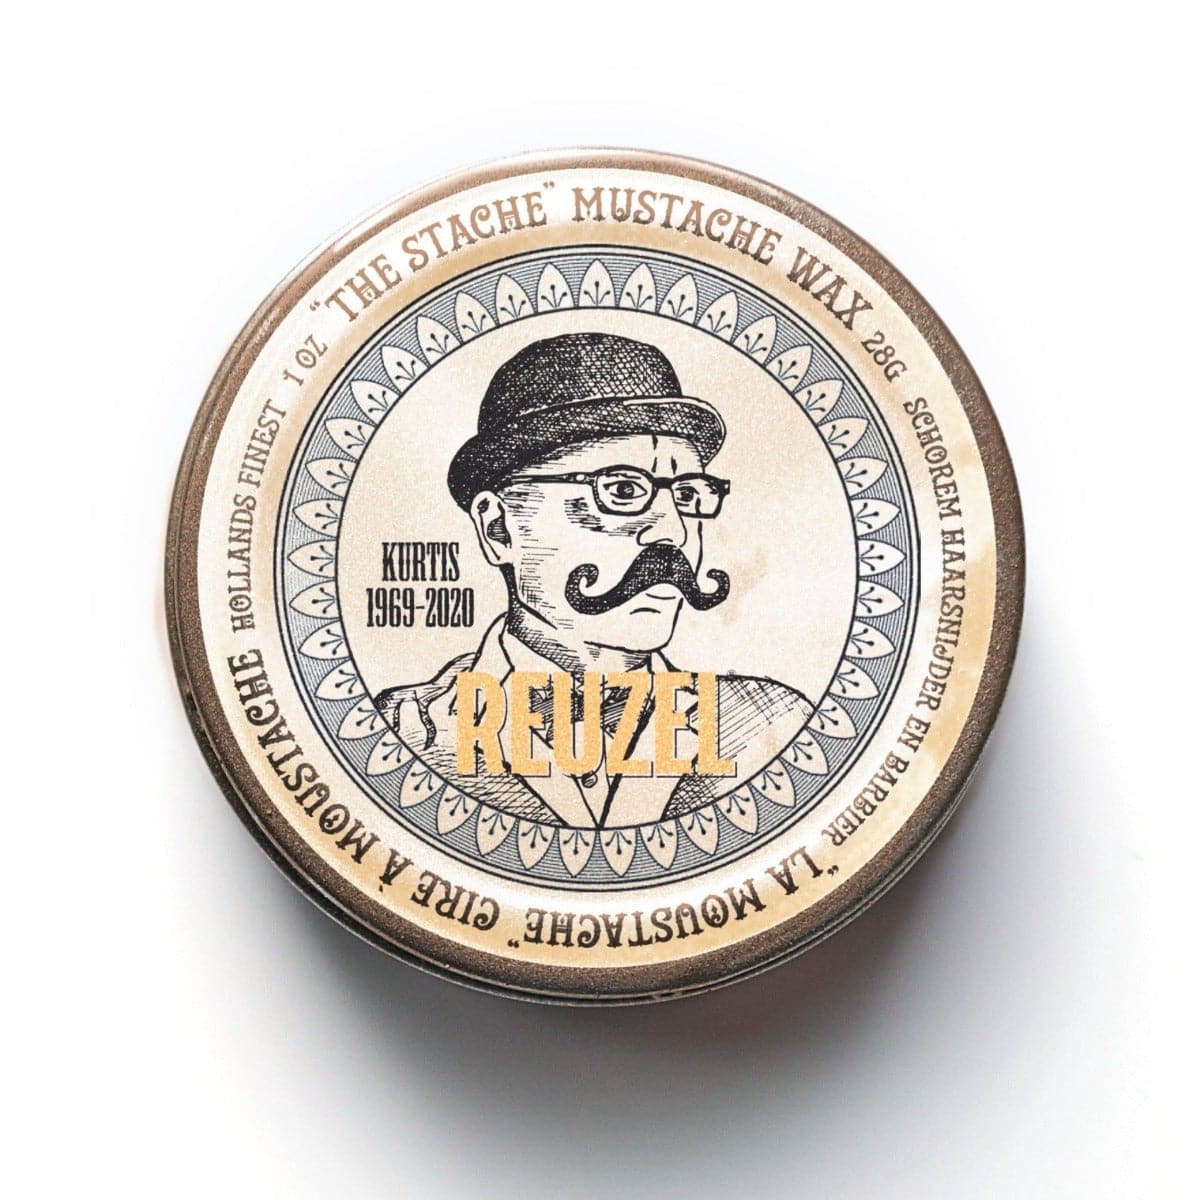 Mustache wax with STRONG HOLD - NATURAL SHINE - BEESWAX BASED.  Beeswax based formula with a natural finish, Mineral oil helps soften coarse hair, Pleasing notes of orange peel and spearmint.